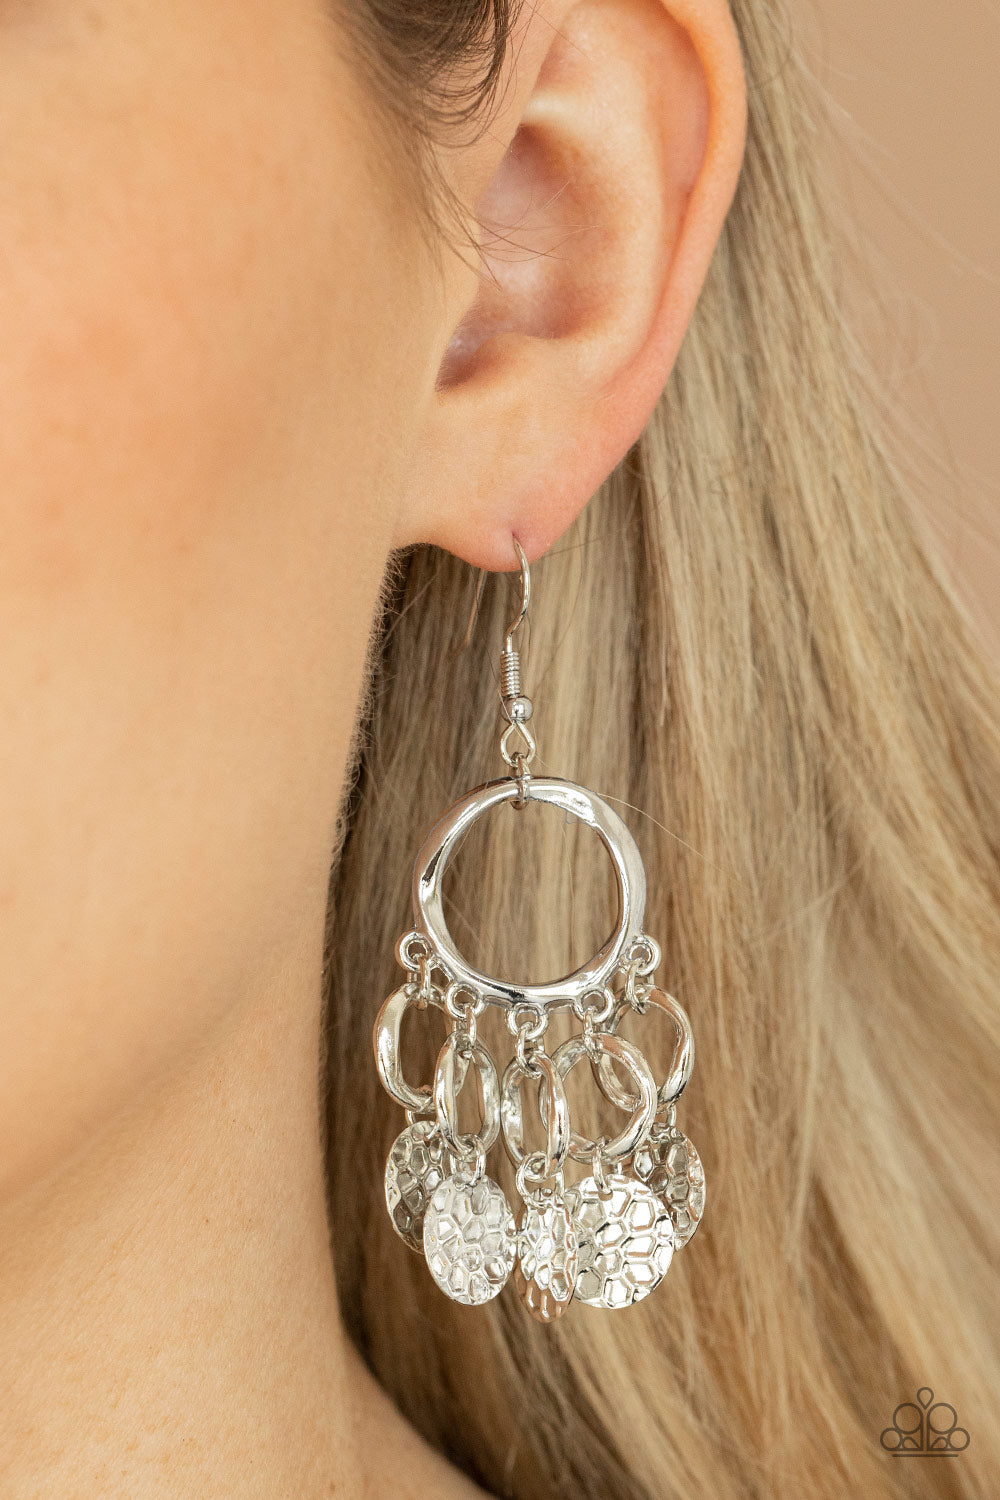 Partners in CHIME - Silver Earrings - Chic Jewelry Boutique